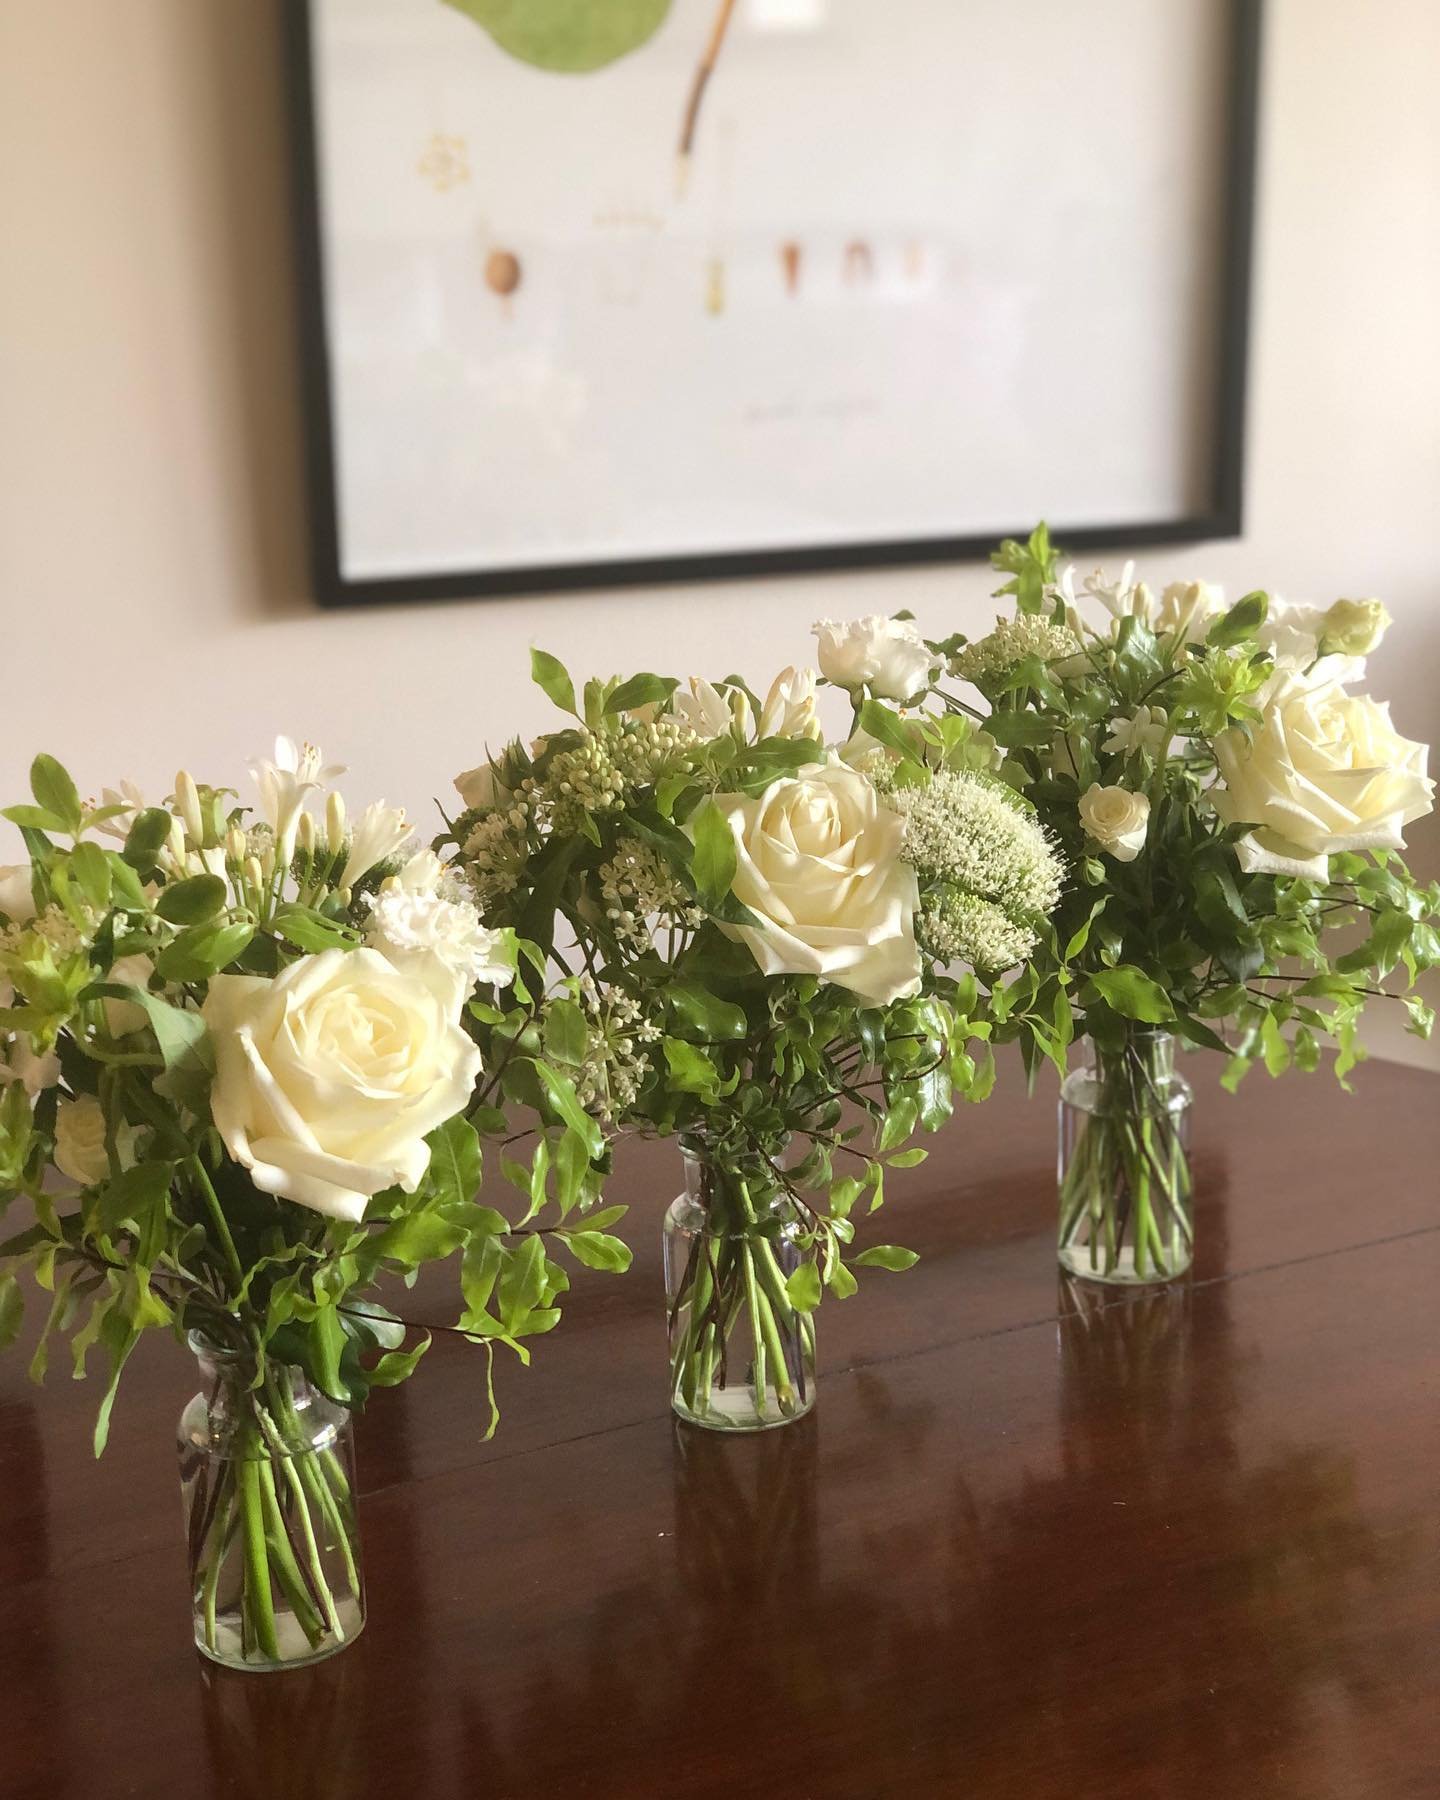 The prettiest little vases to dress the table for a Golden Wedding Anniversary party on Saturday 🥂 .
.
.
#jh_floraldesign #florist #stratfordflorist #shoplocal #smalllocalbusiness #flowers #giftbouquets #bouquets #weddingflorist #funeralflowers #for